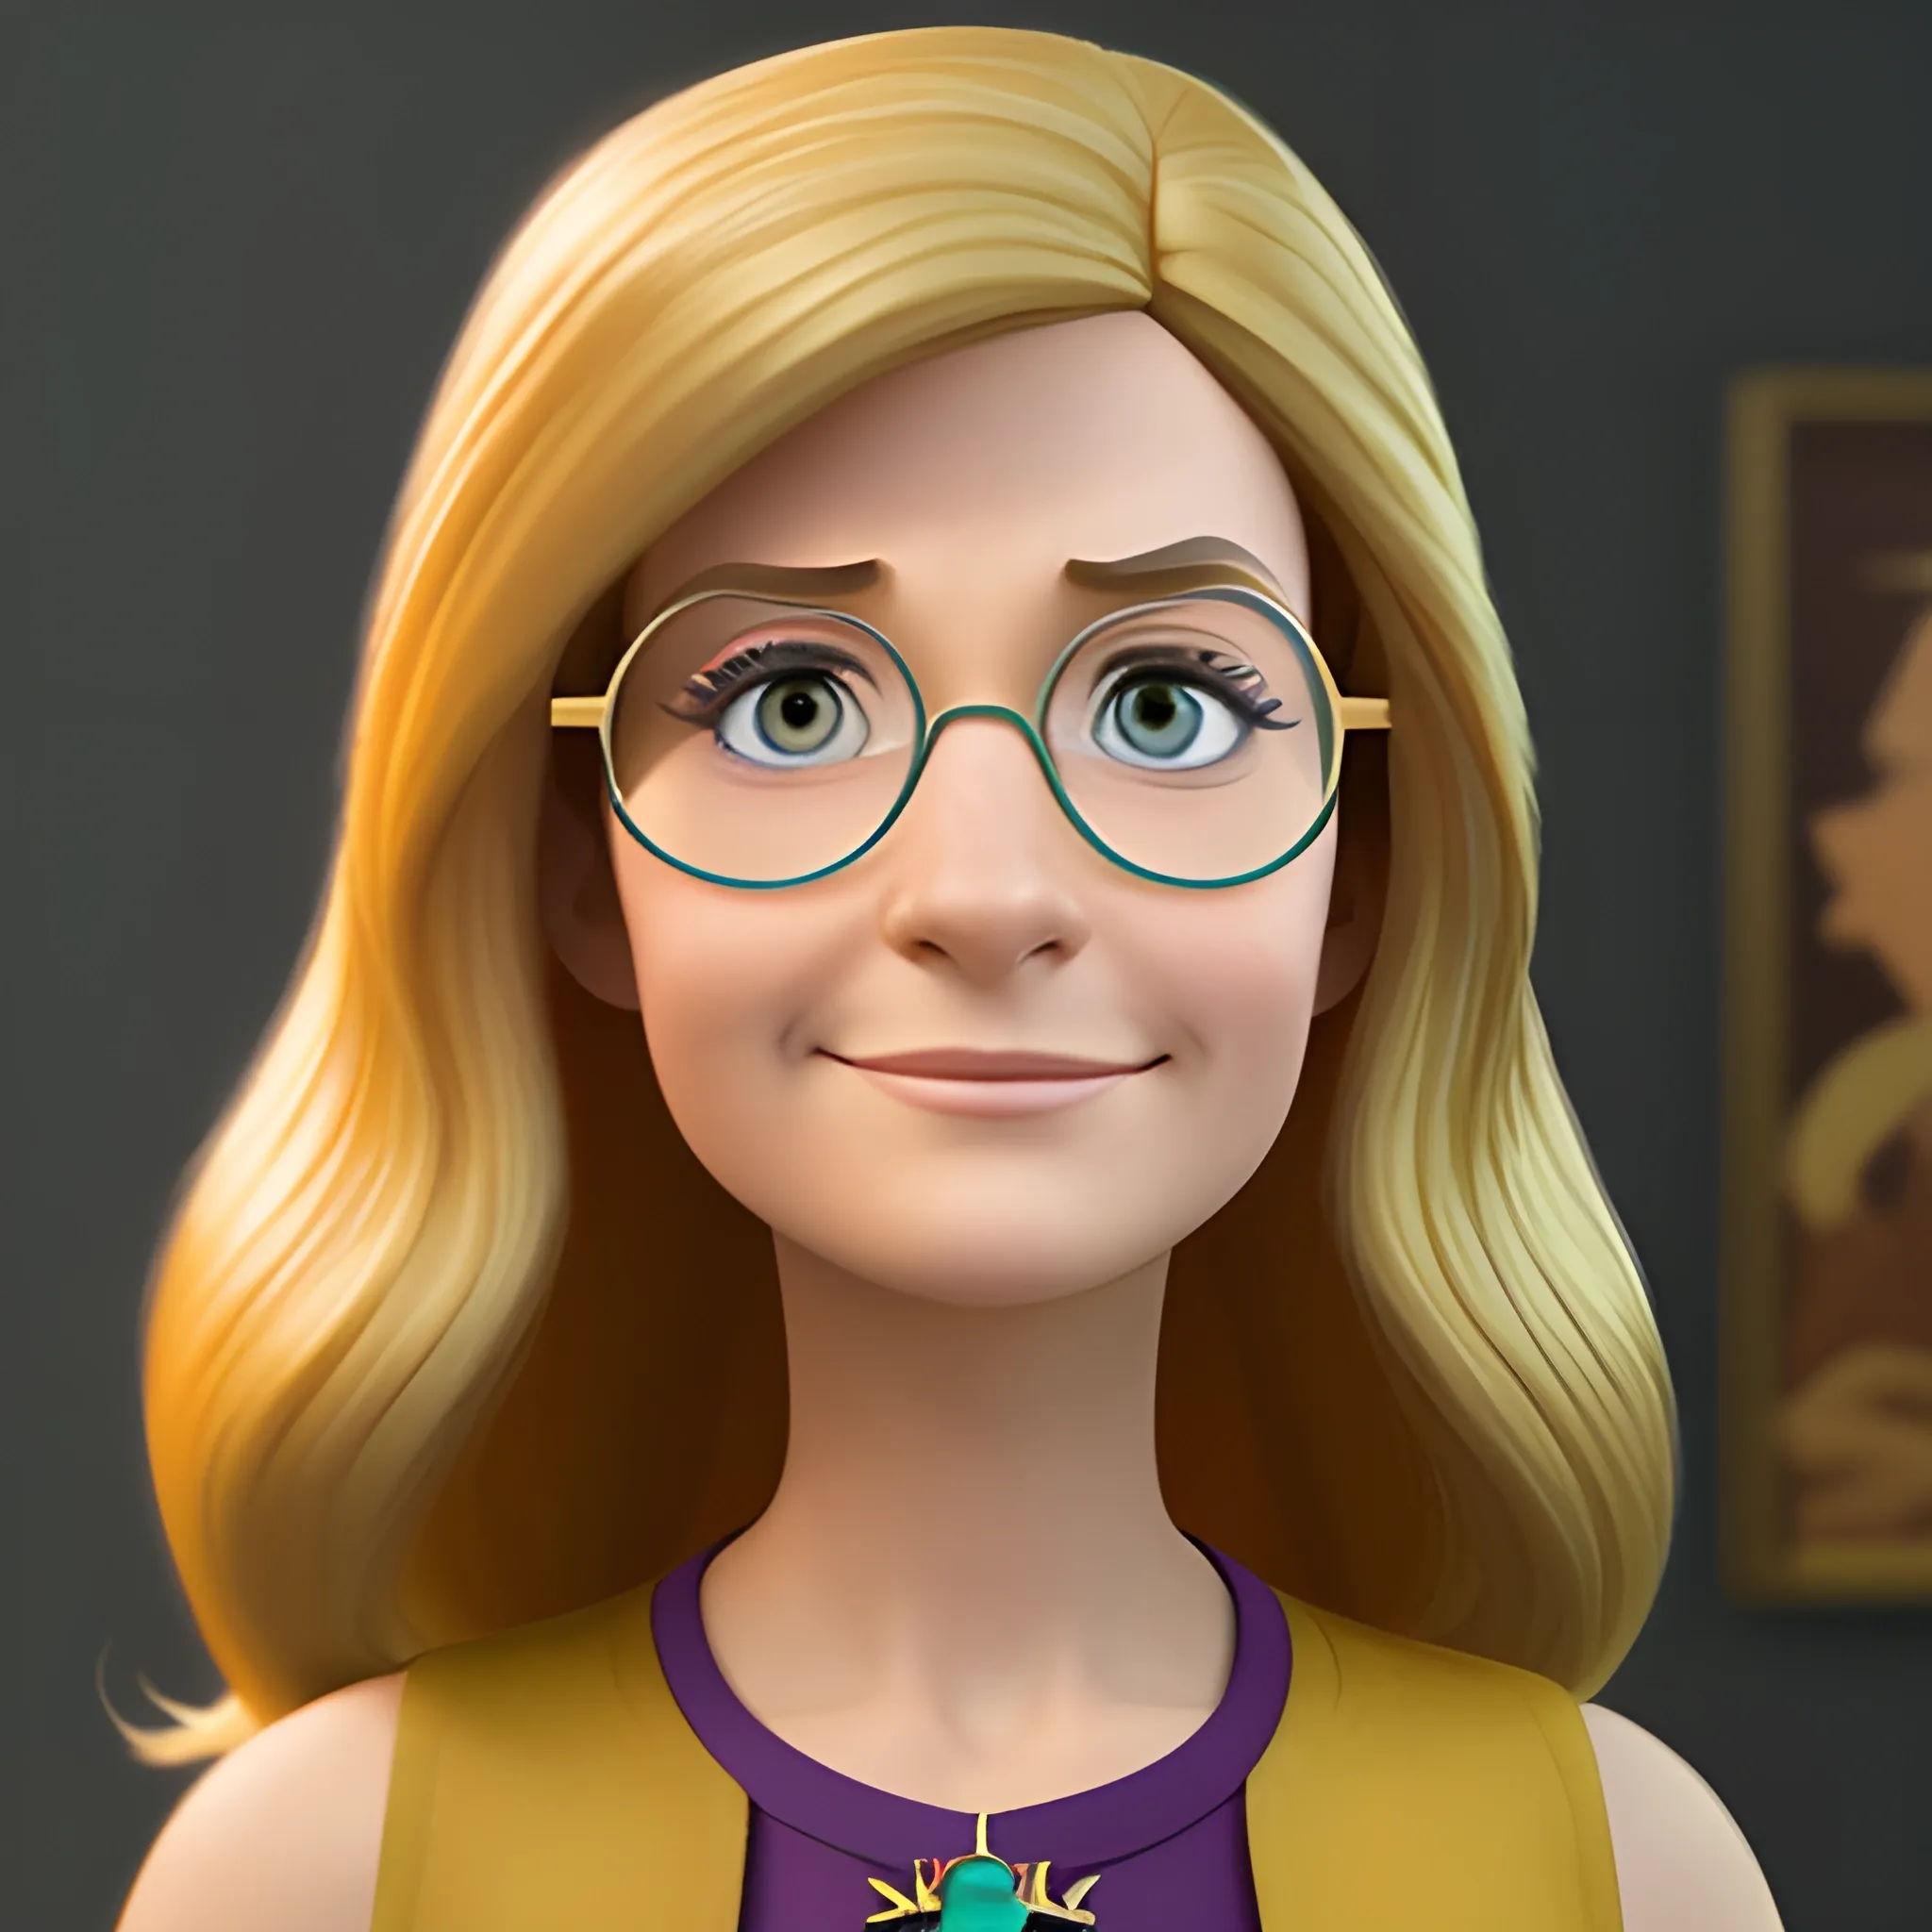 a Disney Pixar Studios character, a woman with shoulder-length hair with golden tips, wearing glasses. Title "klau"